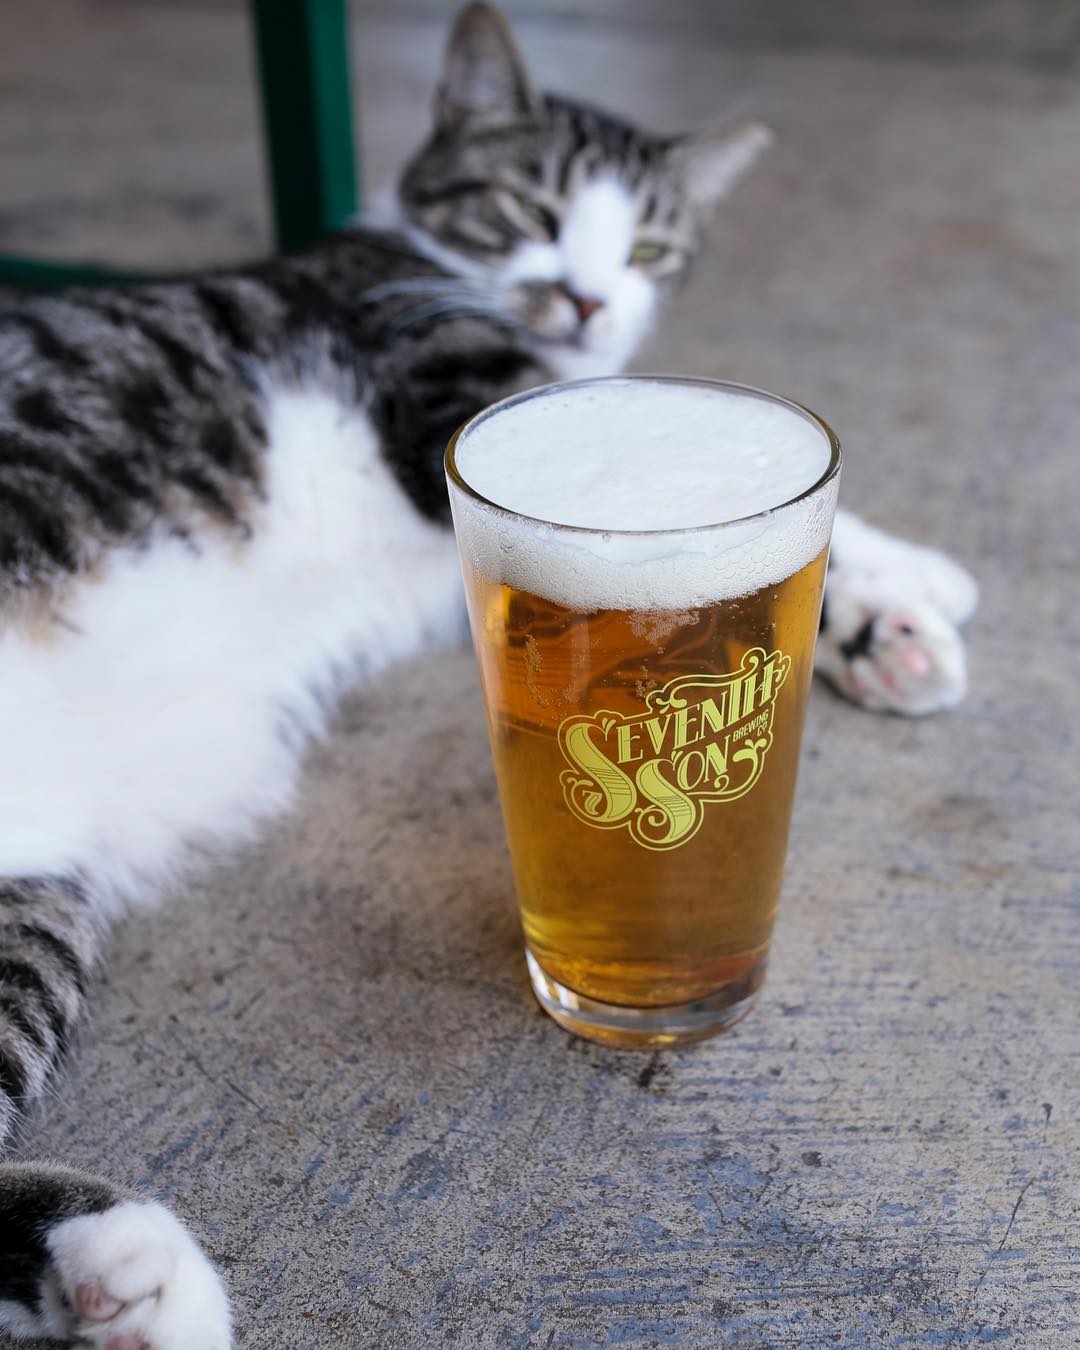 Cat laying beside a pint of beer. Photo by Instagram user @seventh_son_brewing